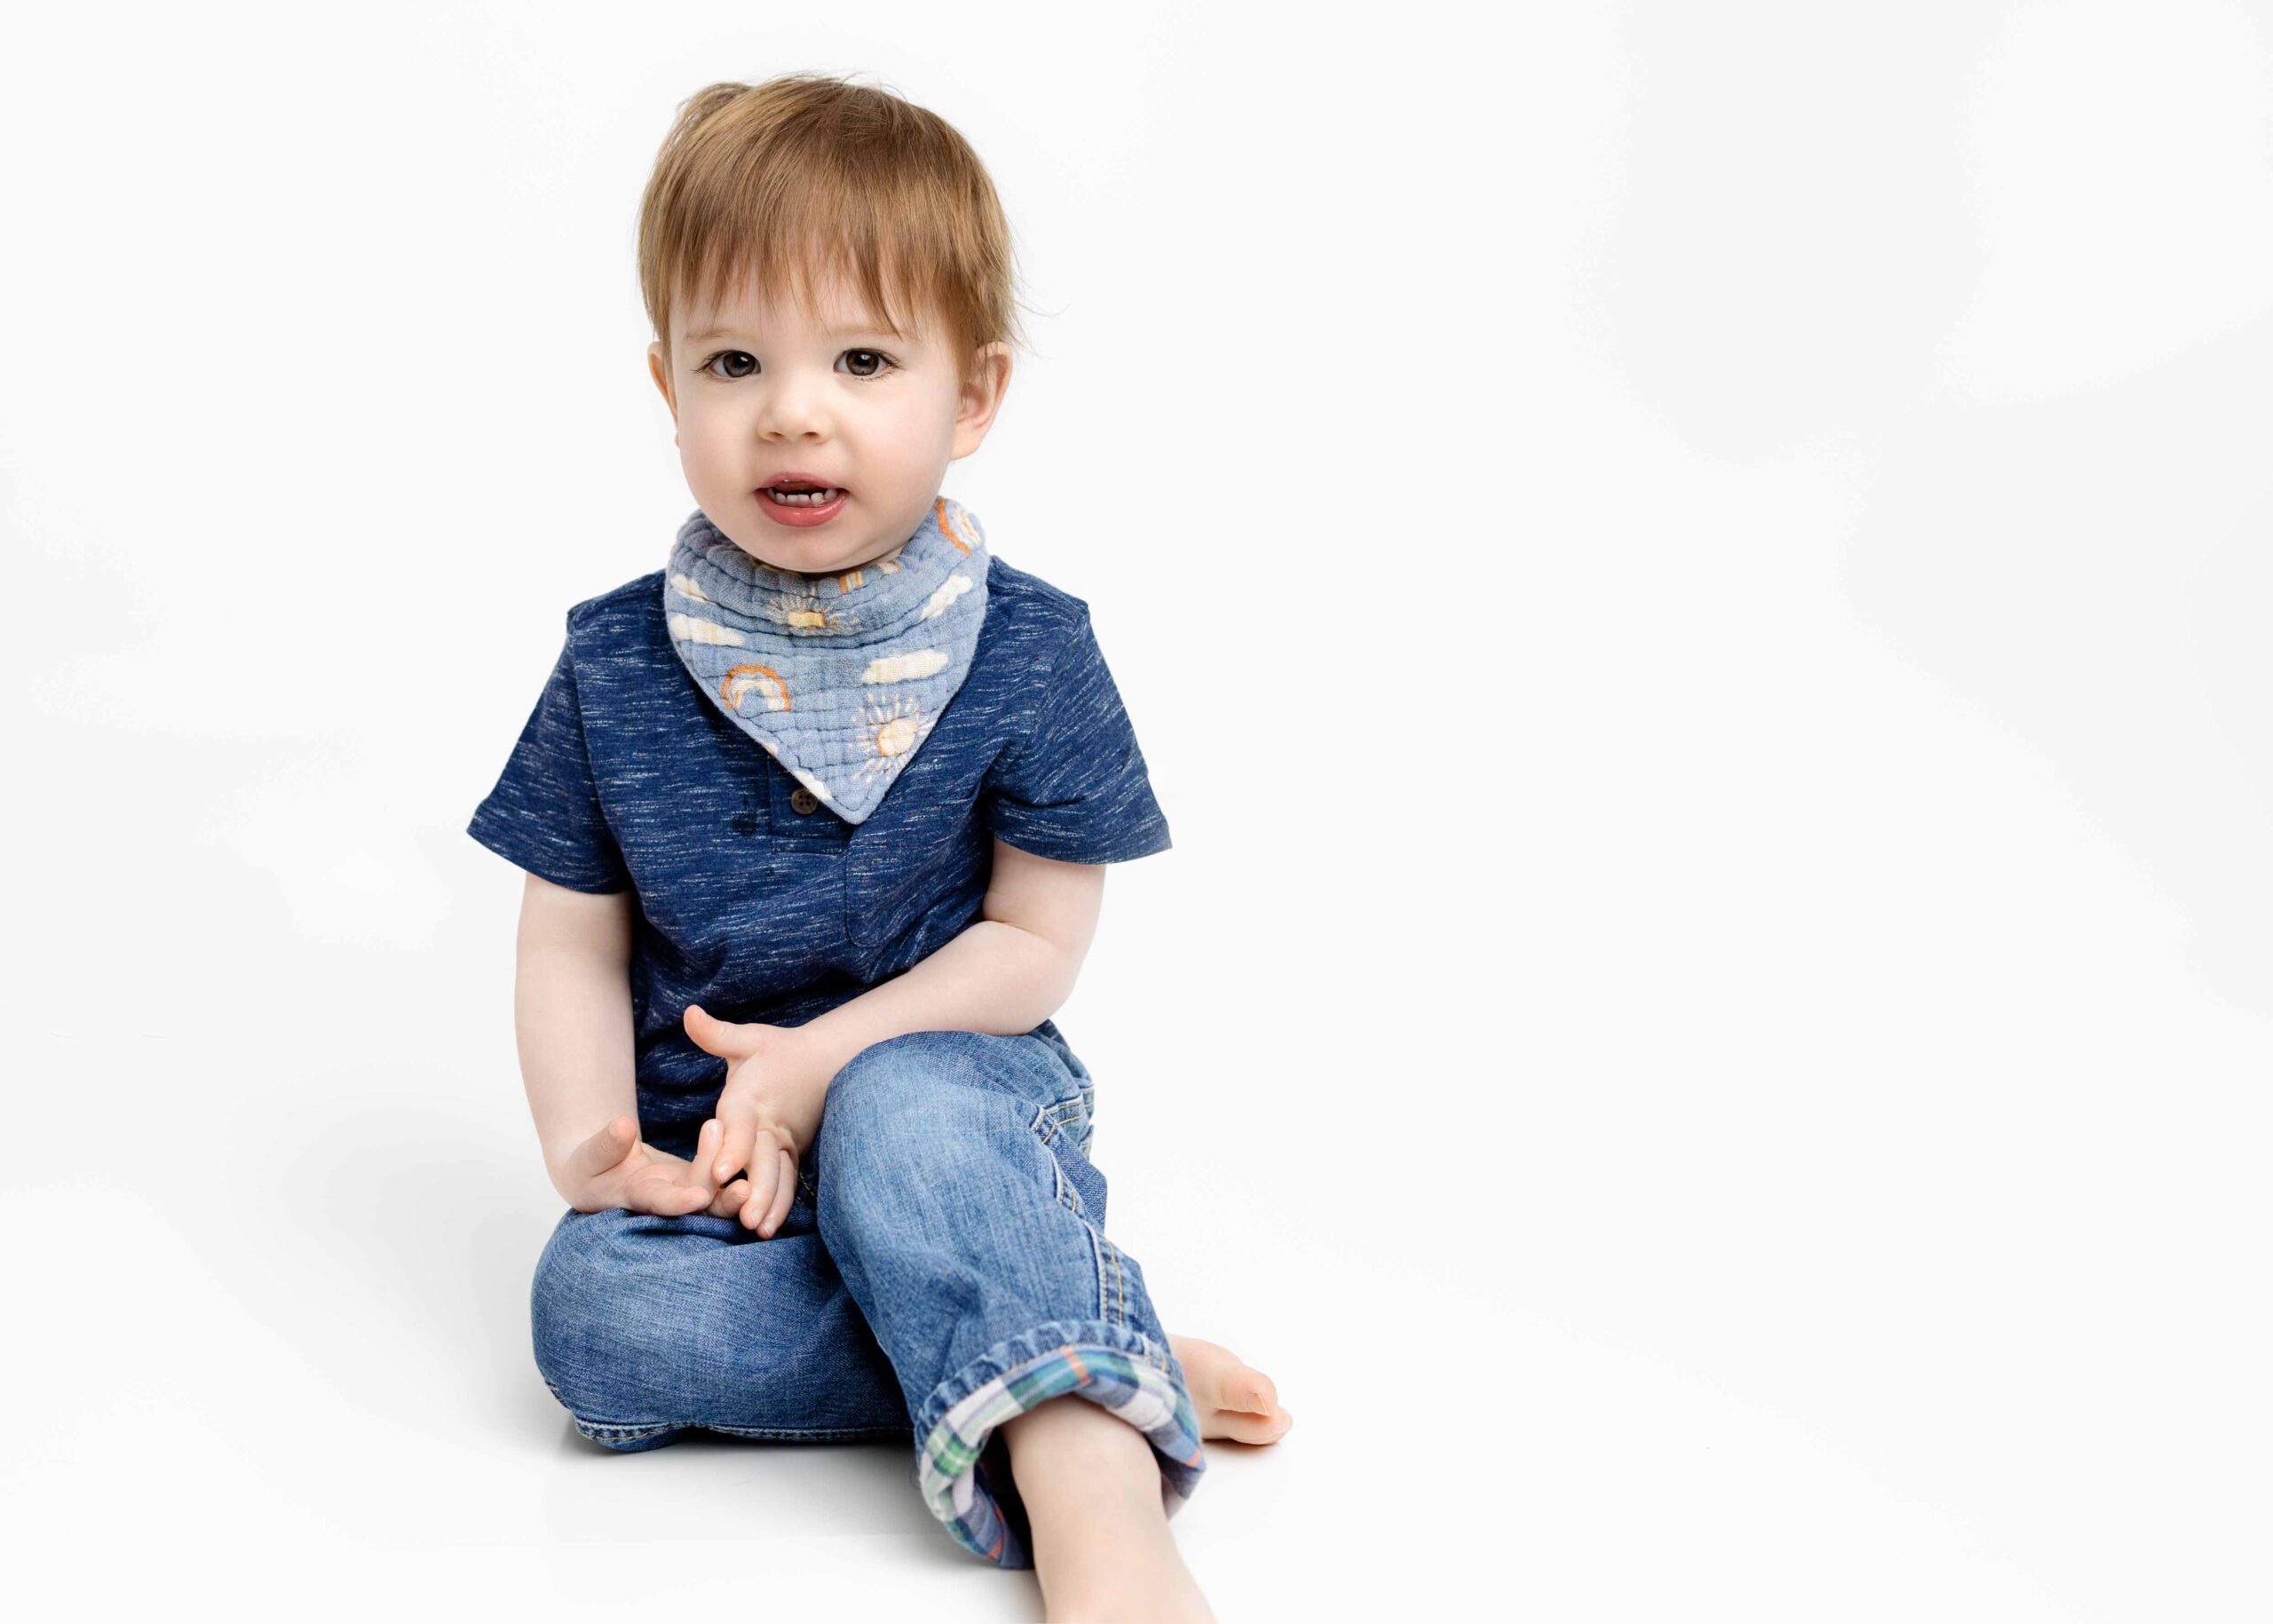 Little boy sitting with jeans and a blue shirt